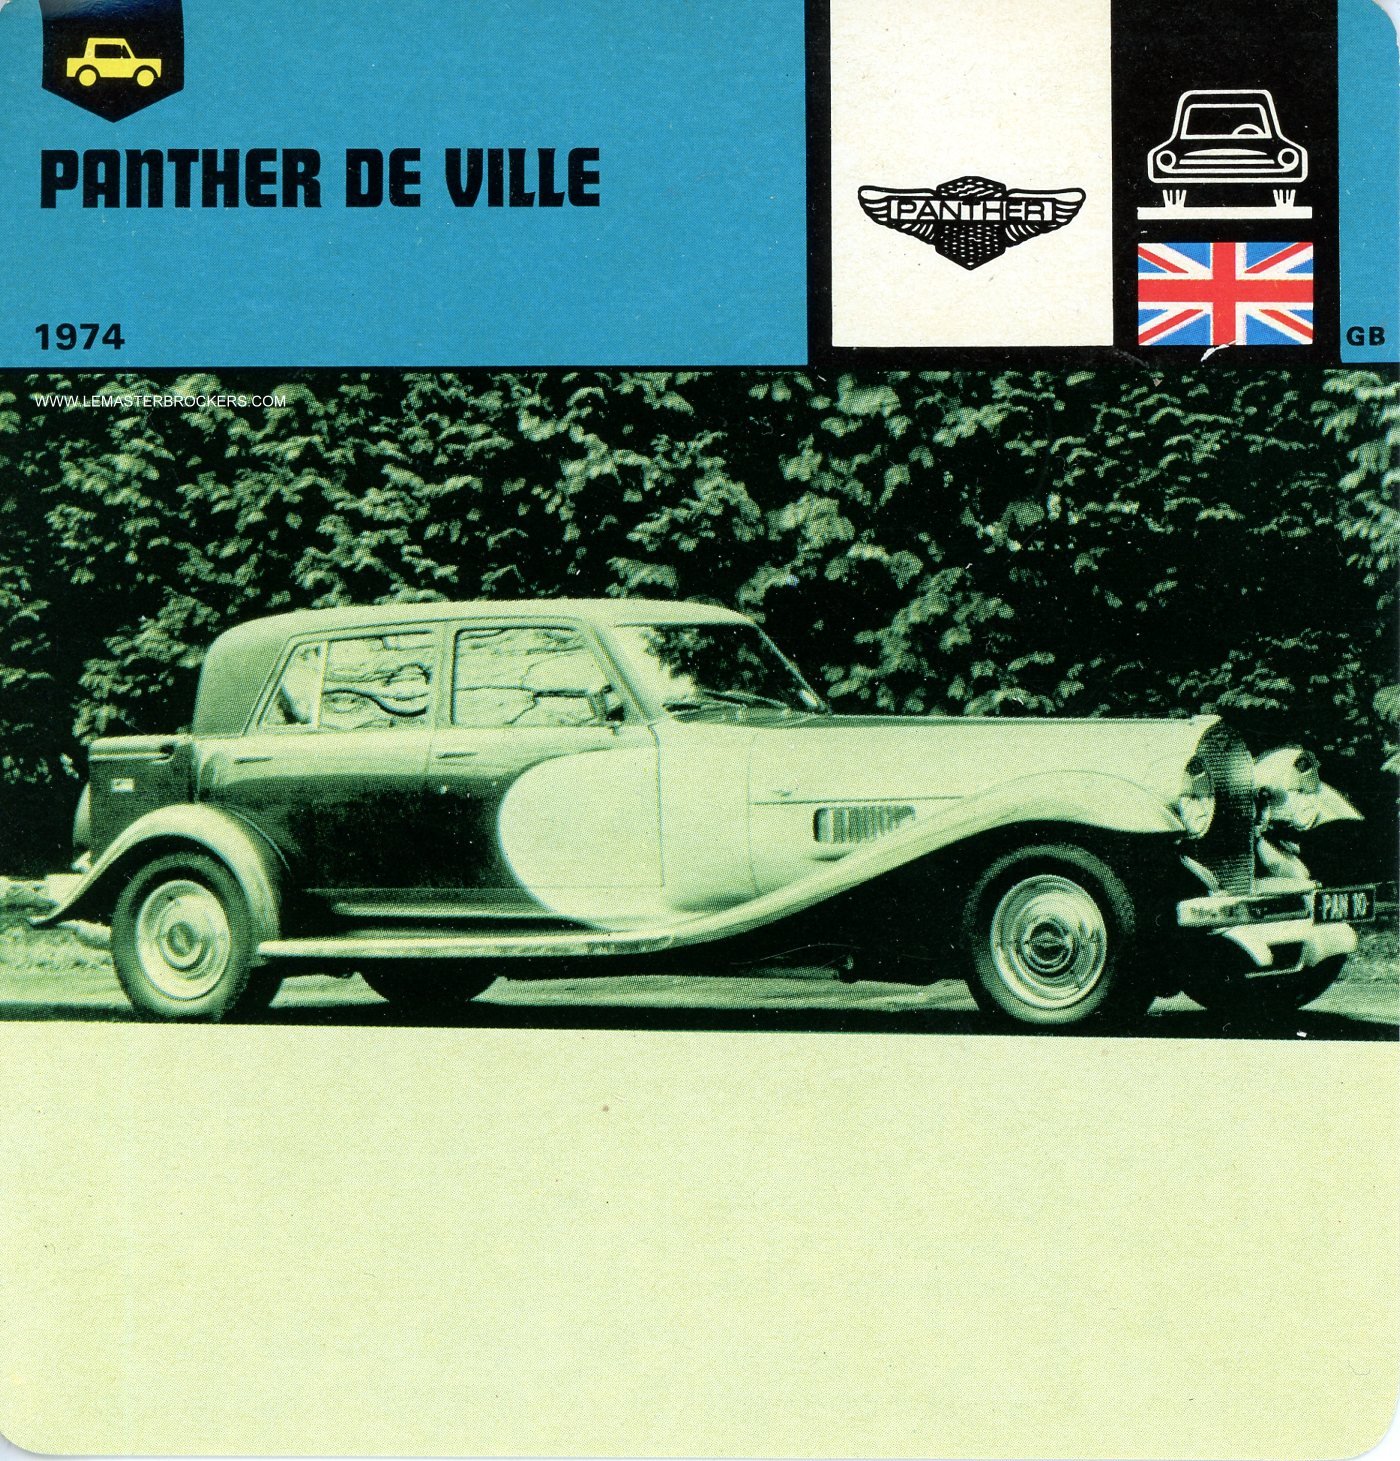 FICHE AUTO PANTHER CARS CARD LEMASTERBROCKERS